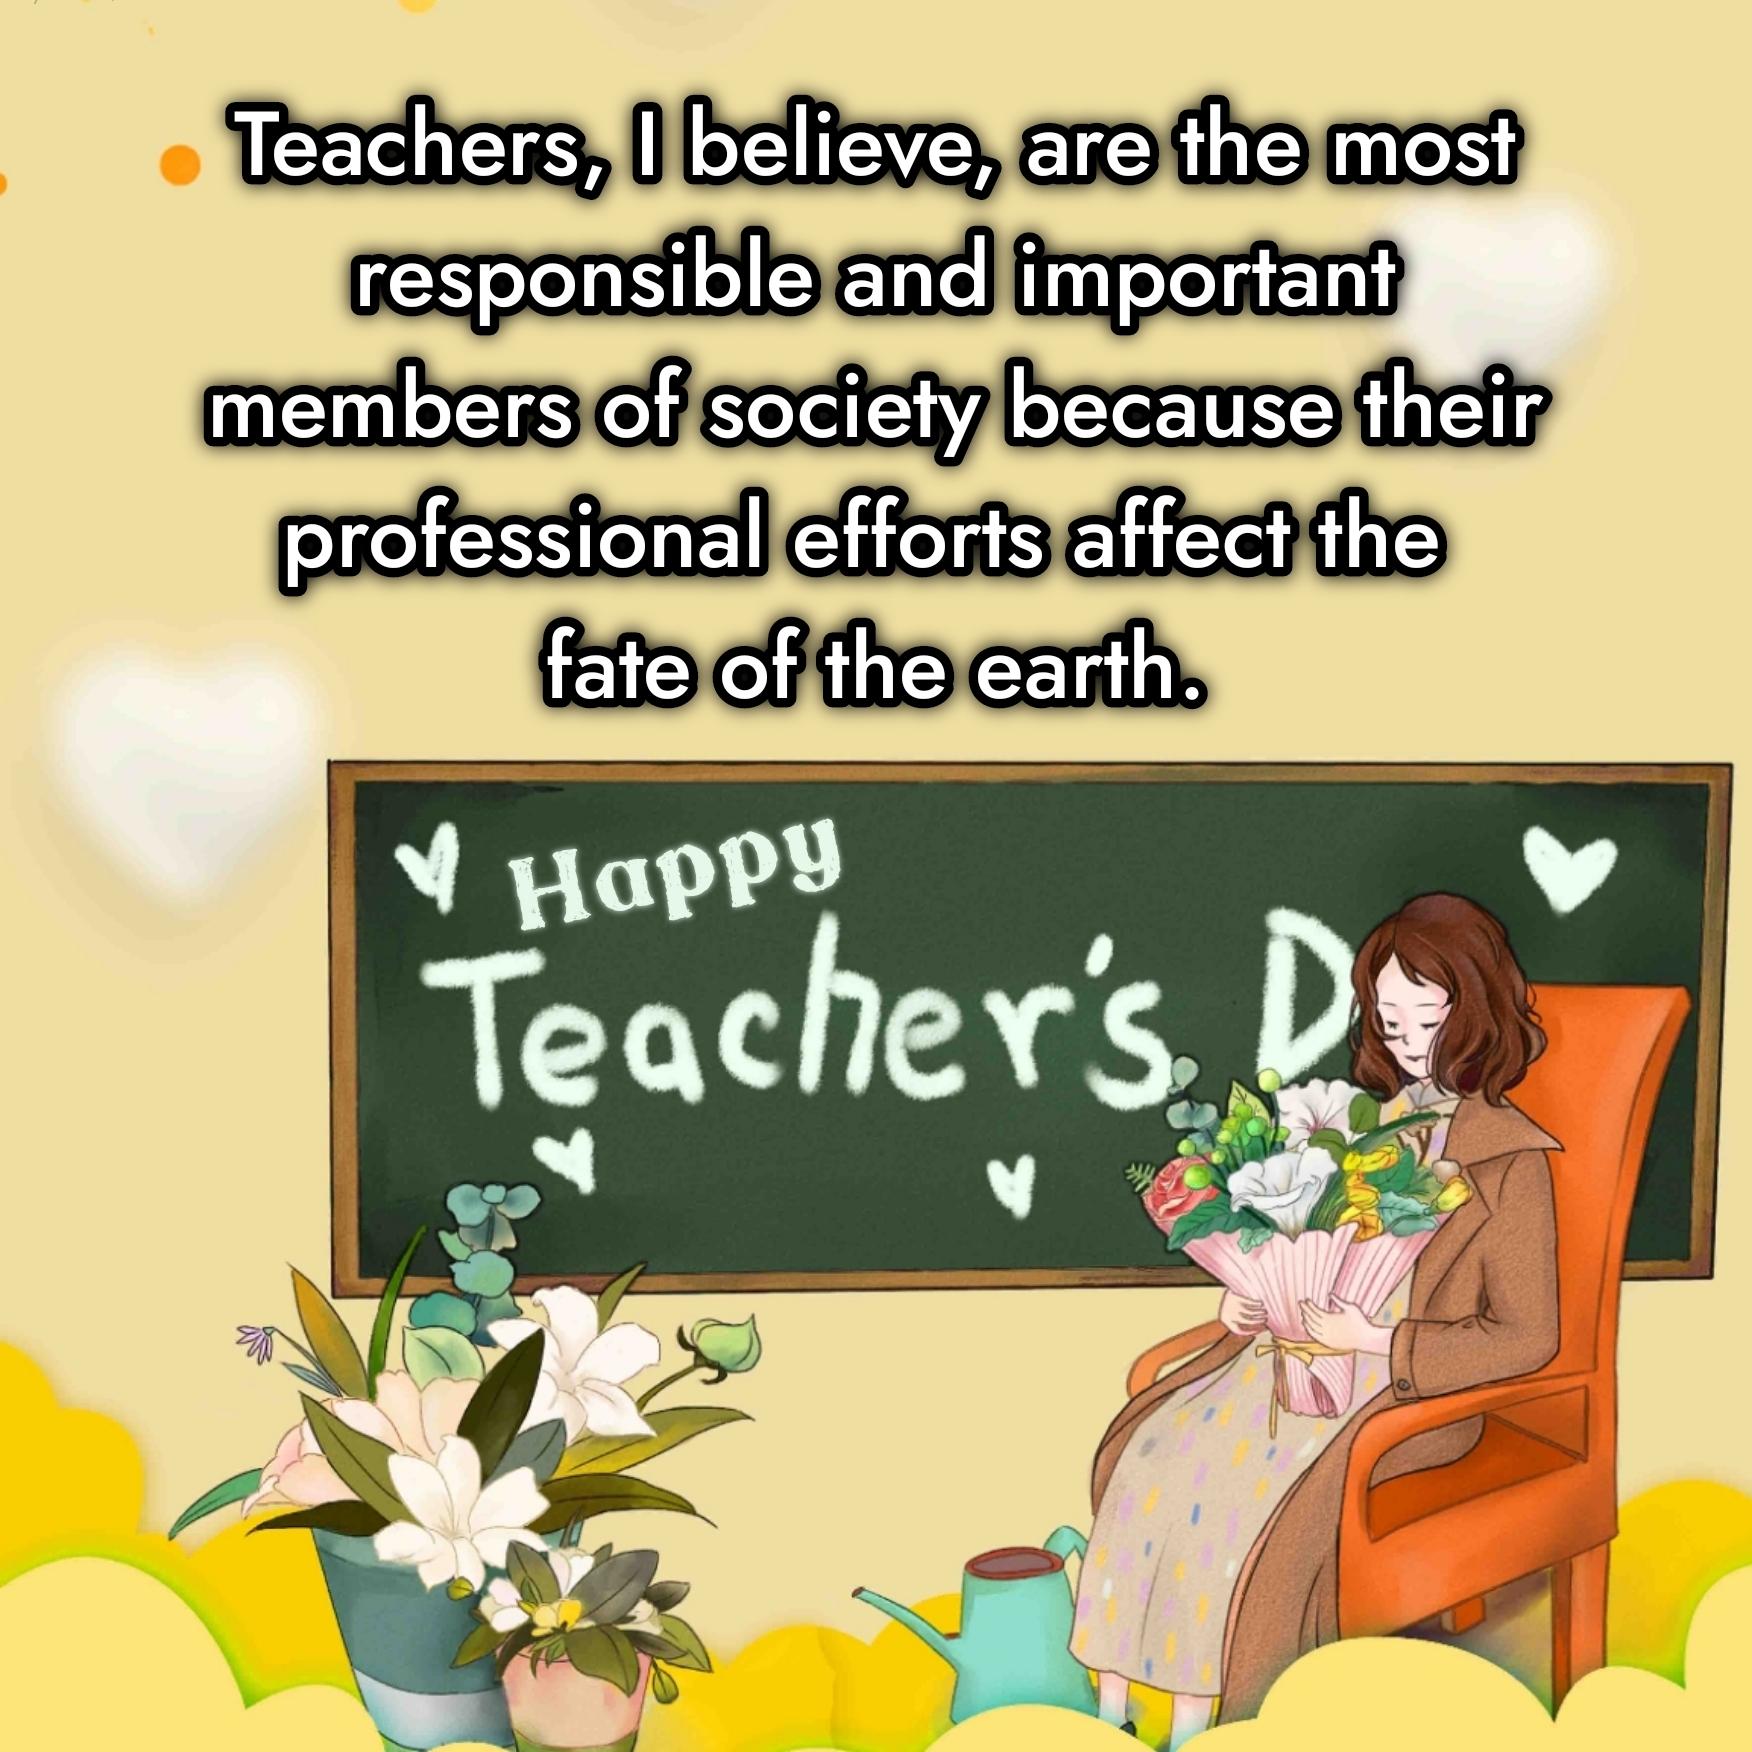 Teachers I believe are the most responsible and important members of society